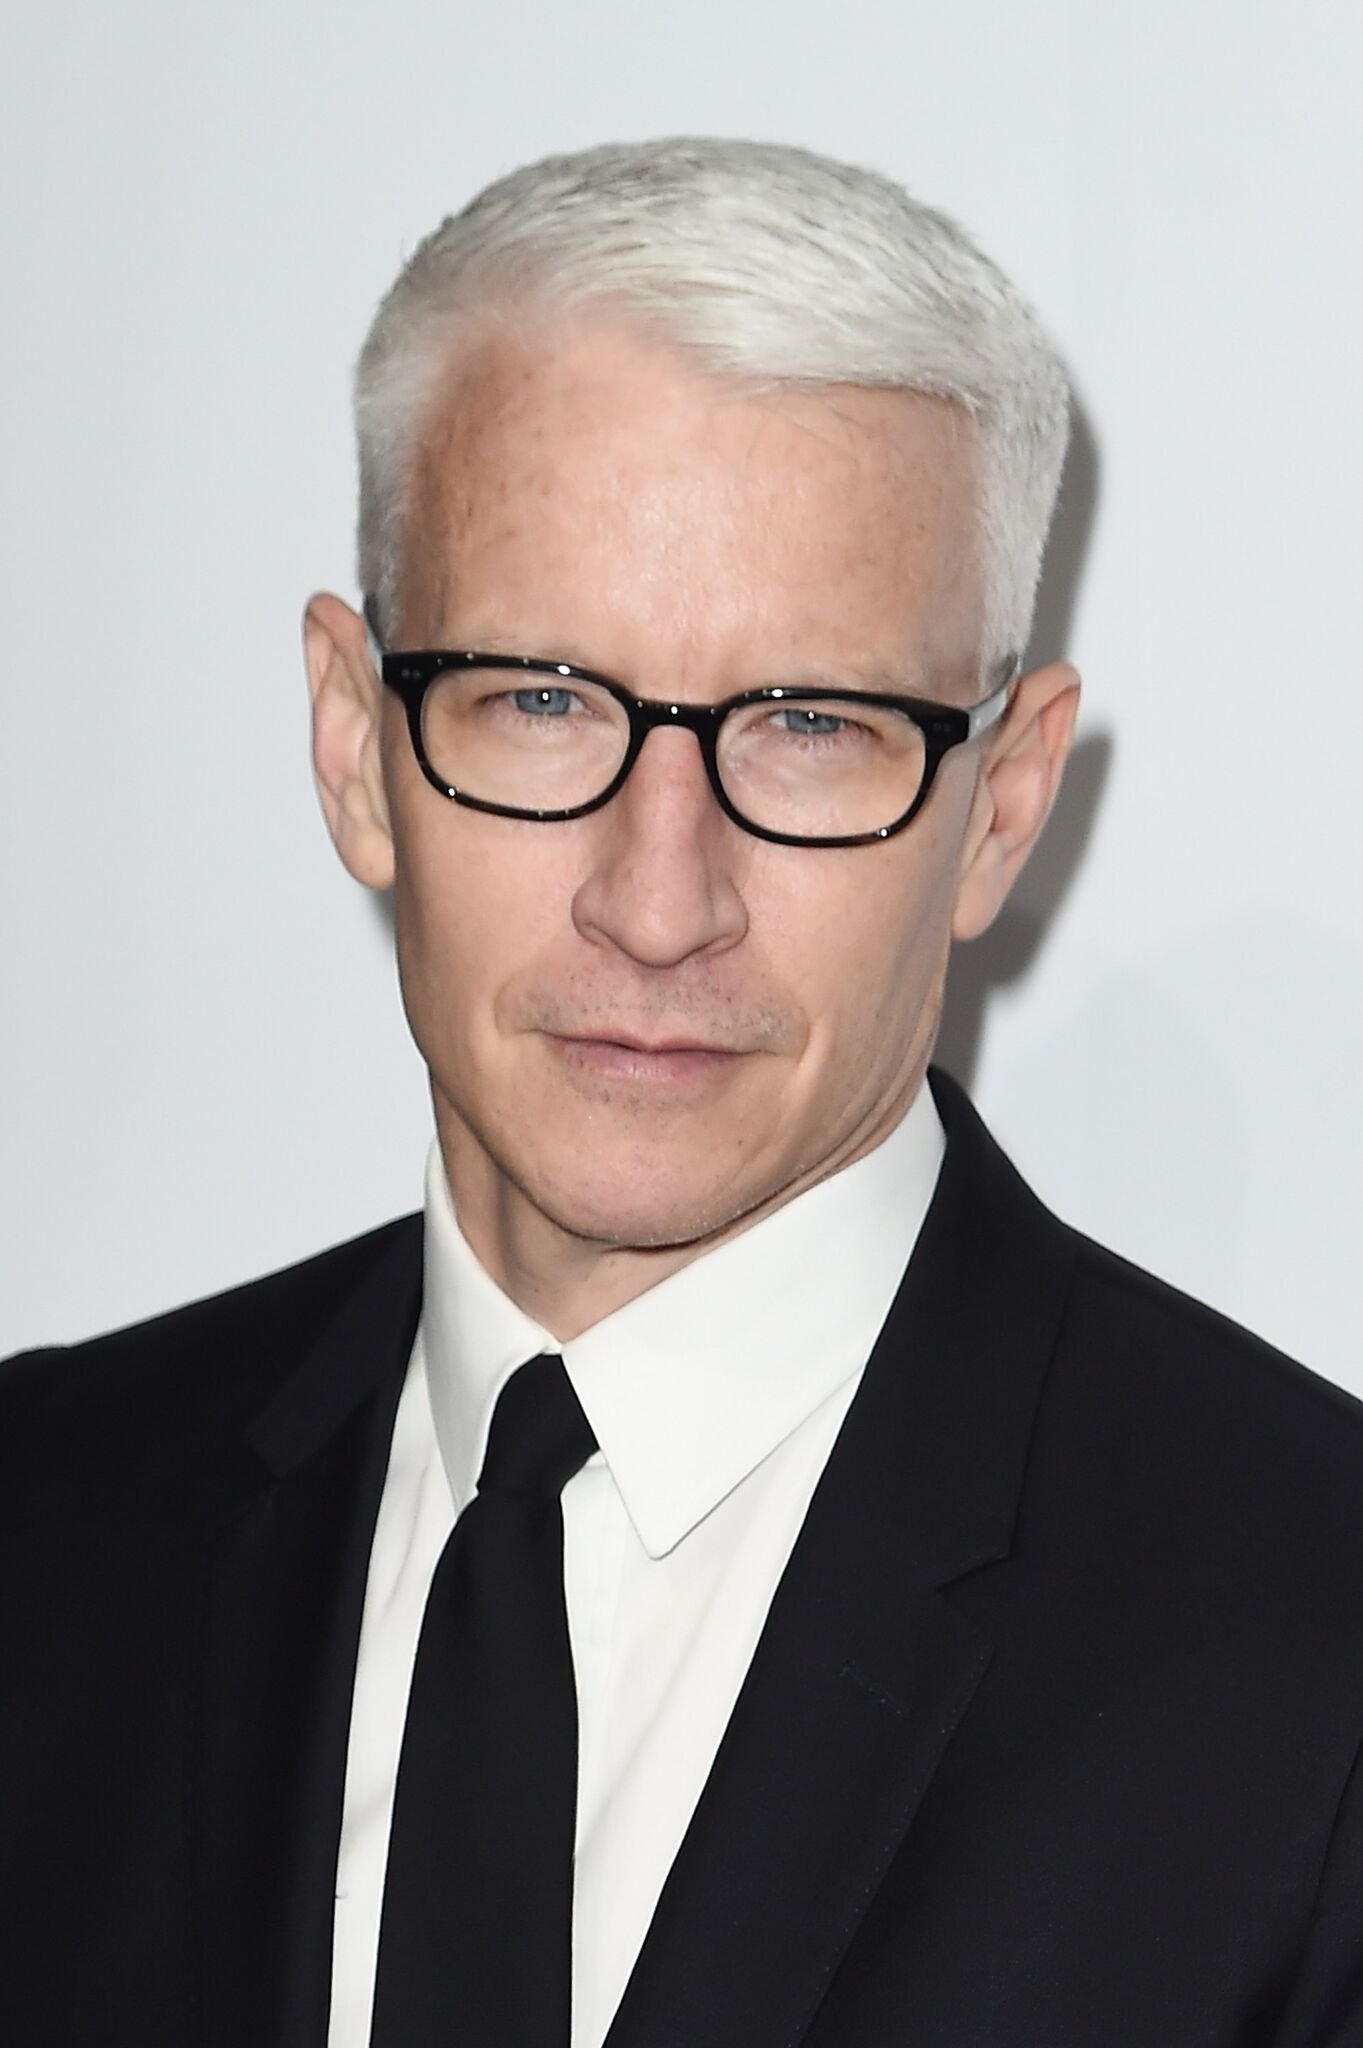  Anderson Cooper attends the Billboard Women in Music 2016 event | Getty Images